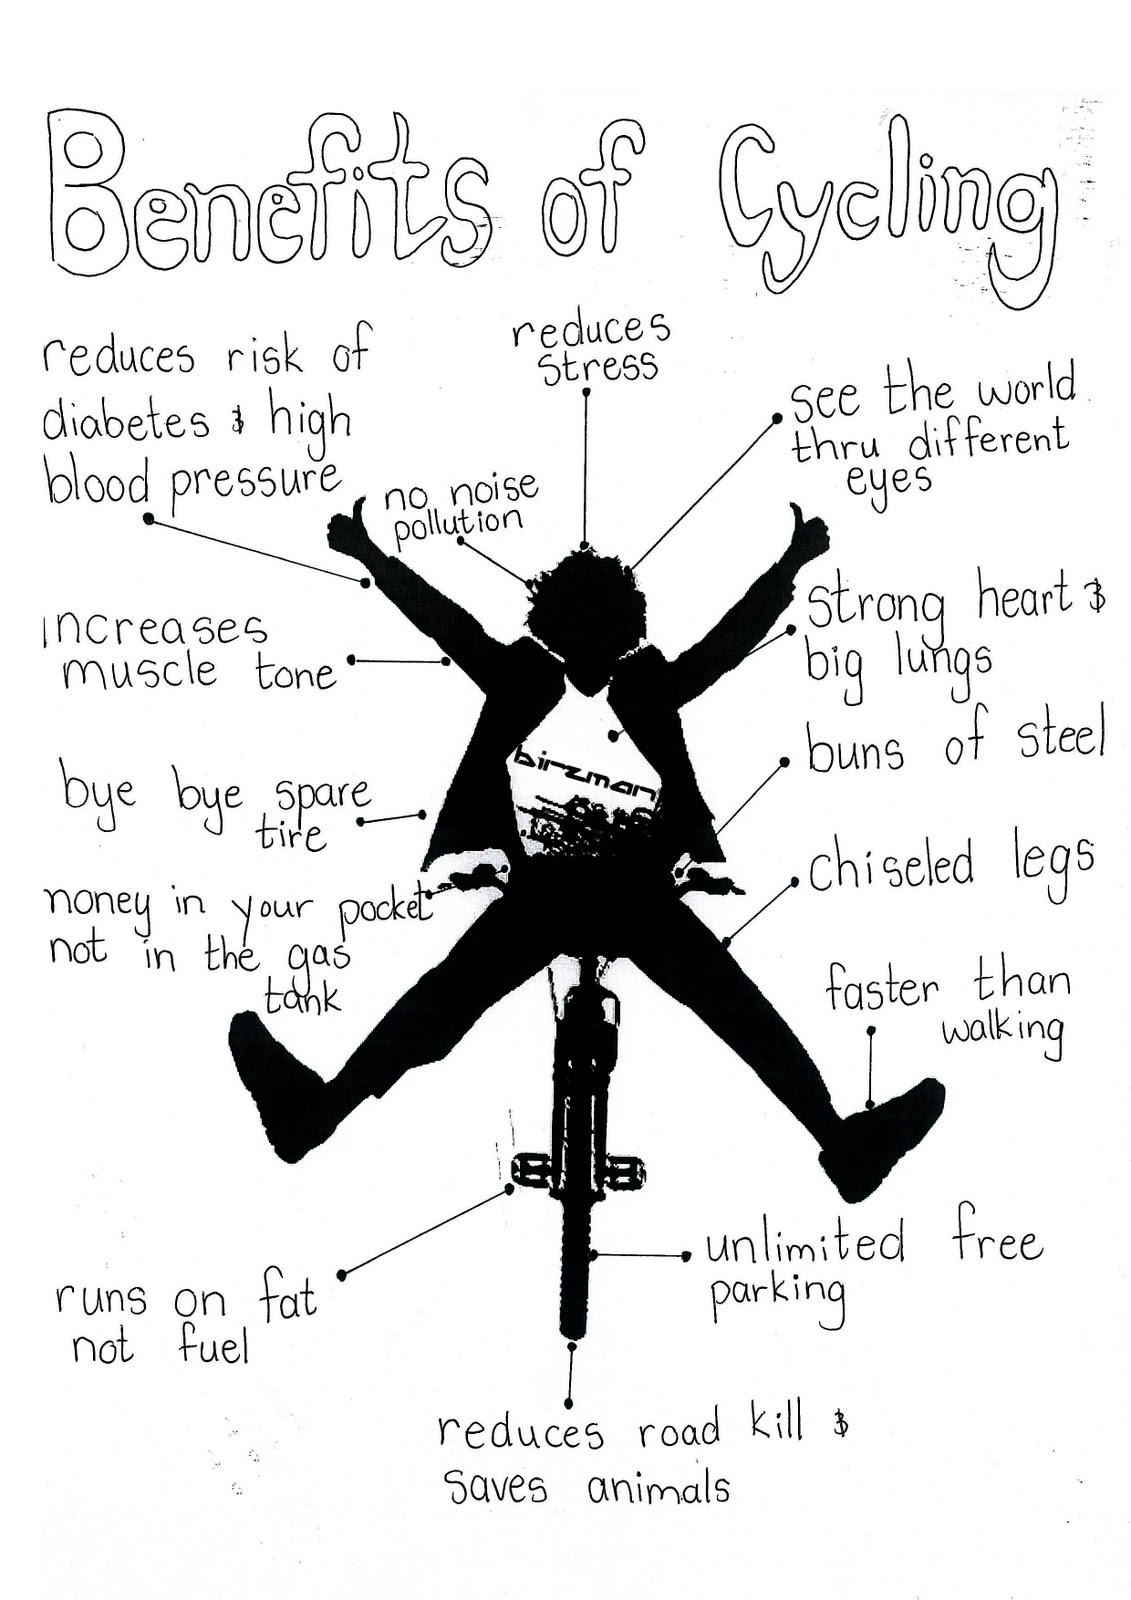 These are the benefits of cycling that might be classified as healthy.